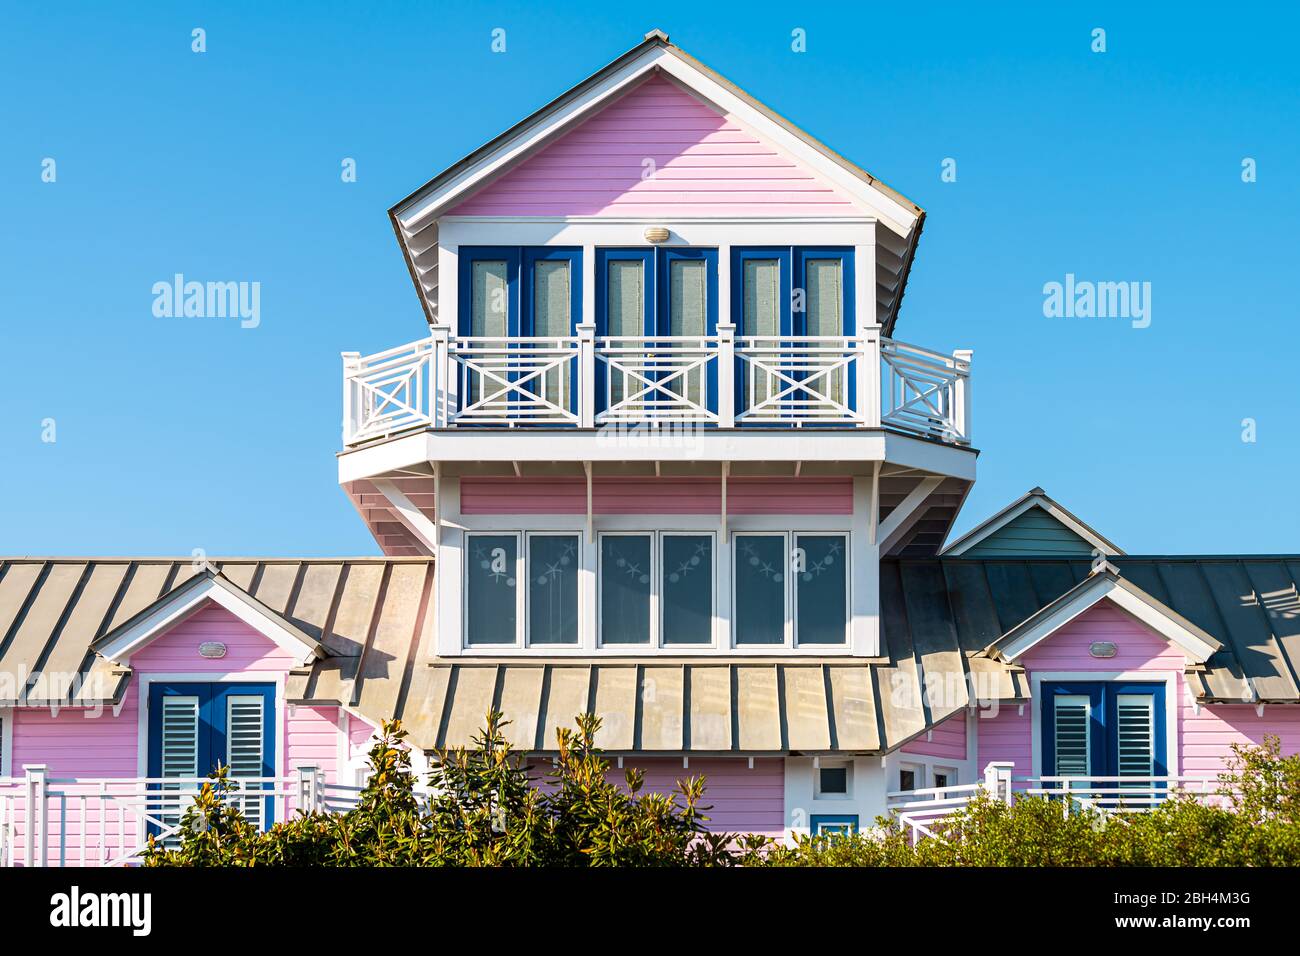 Wooden house tower architecture by beach ocean nobody in Florida view during sunny day with pink color of new urbanism design and blue sky Stock Photo